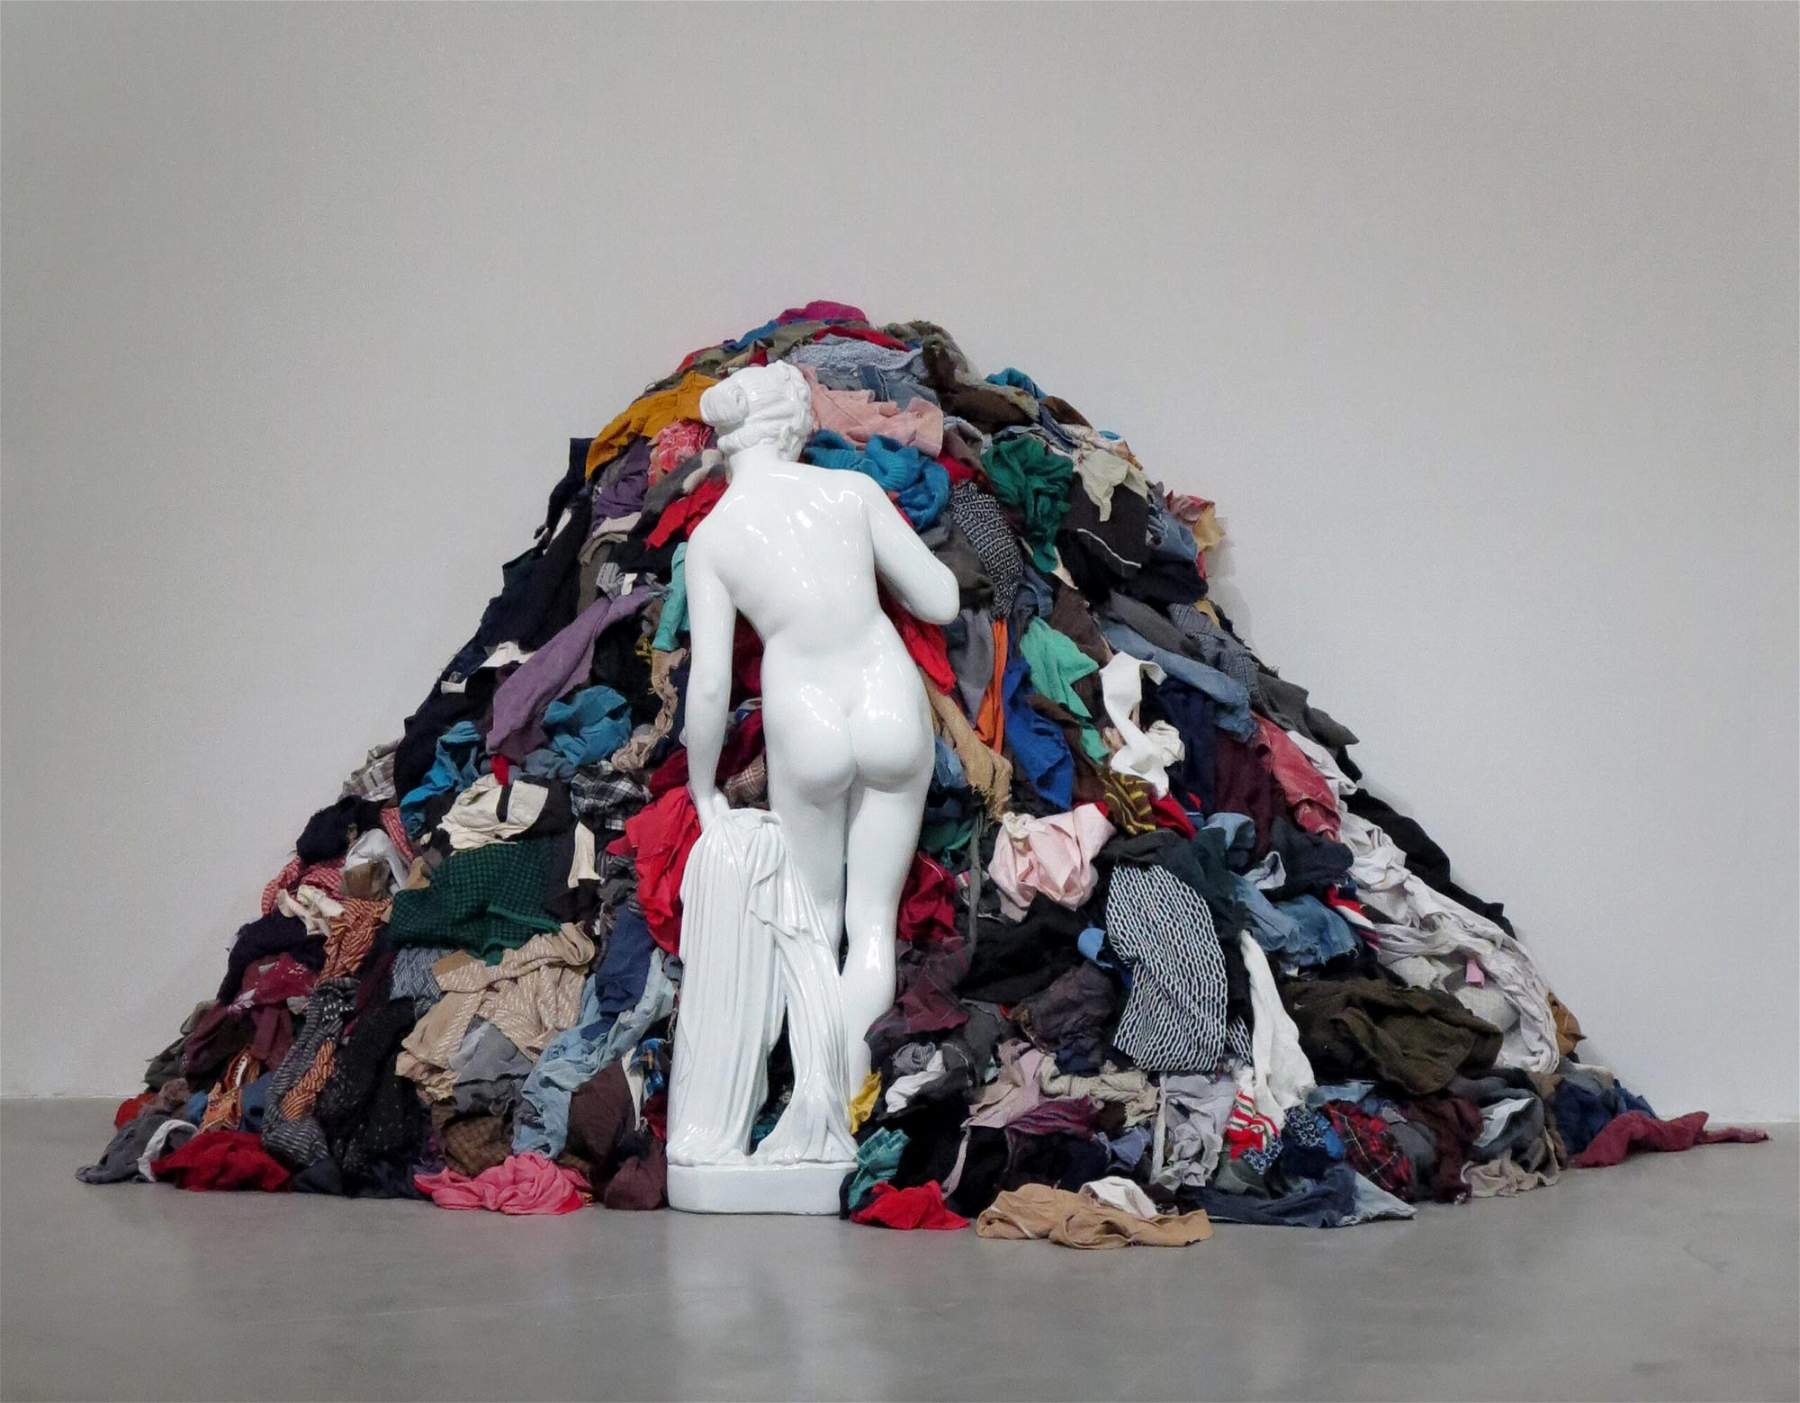 Michelangelo Pistoletto's Truth: major exhibition of the artist of the Third Paradise in Switzerland.